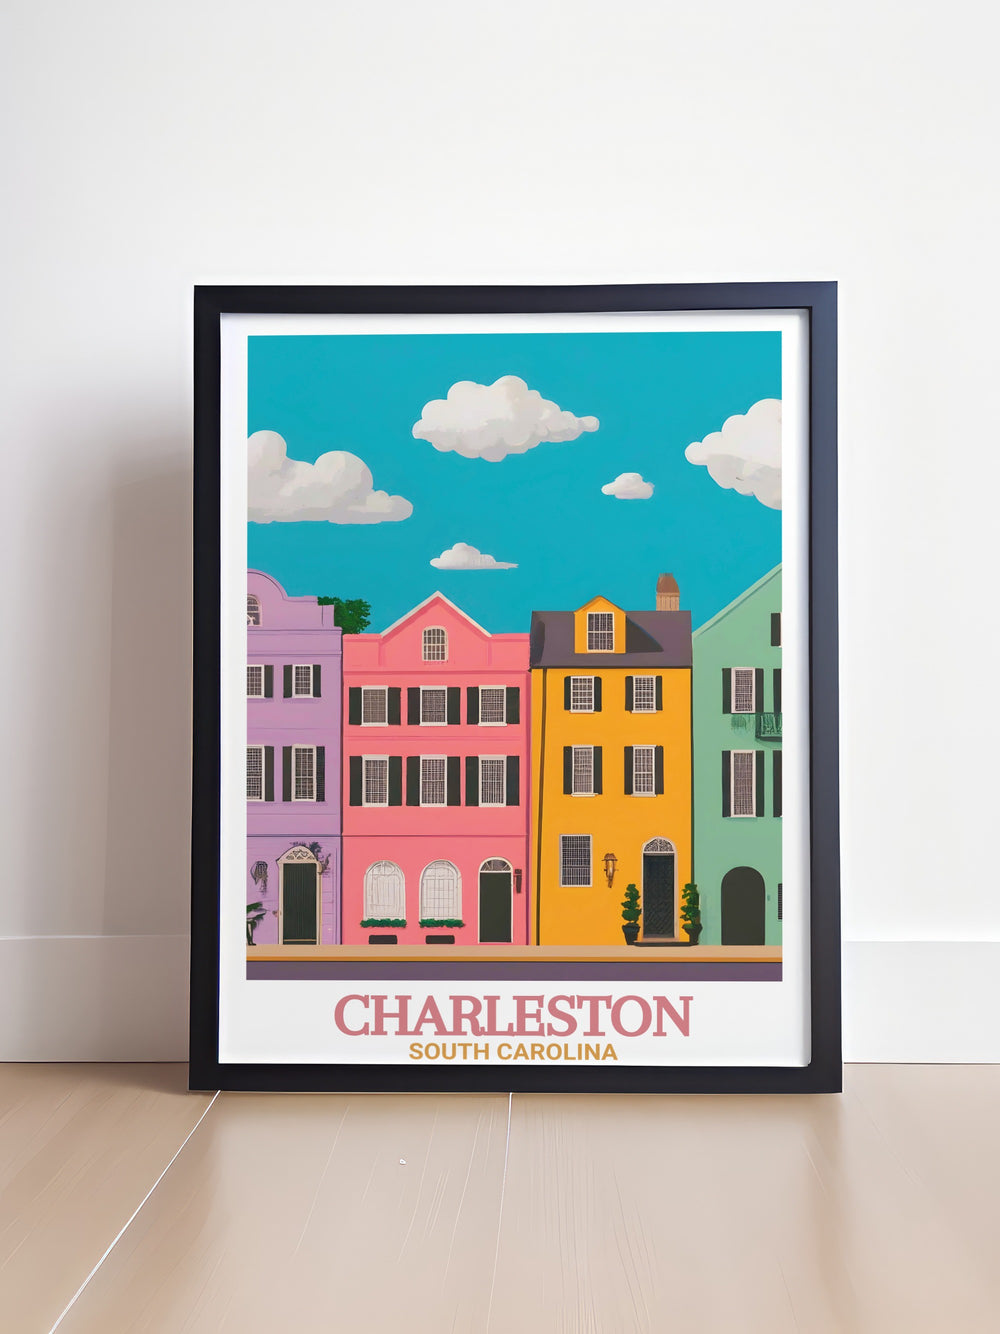 Stunning Rainbow Row prints highlighting the beautiful blend of colors and architectural details of Charleston ideal for wall art and home decor bringing the vibrant spirit of Rainbow Row into your living space